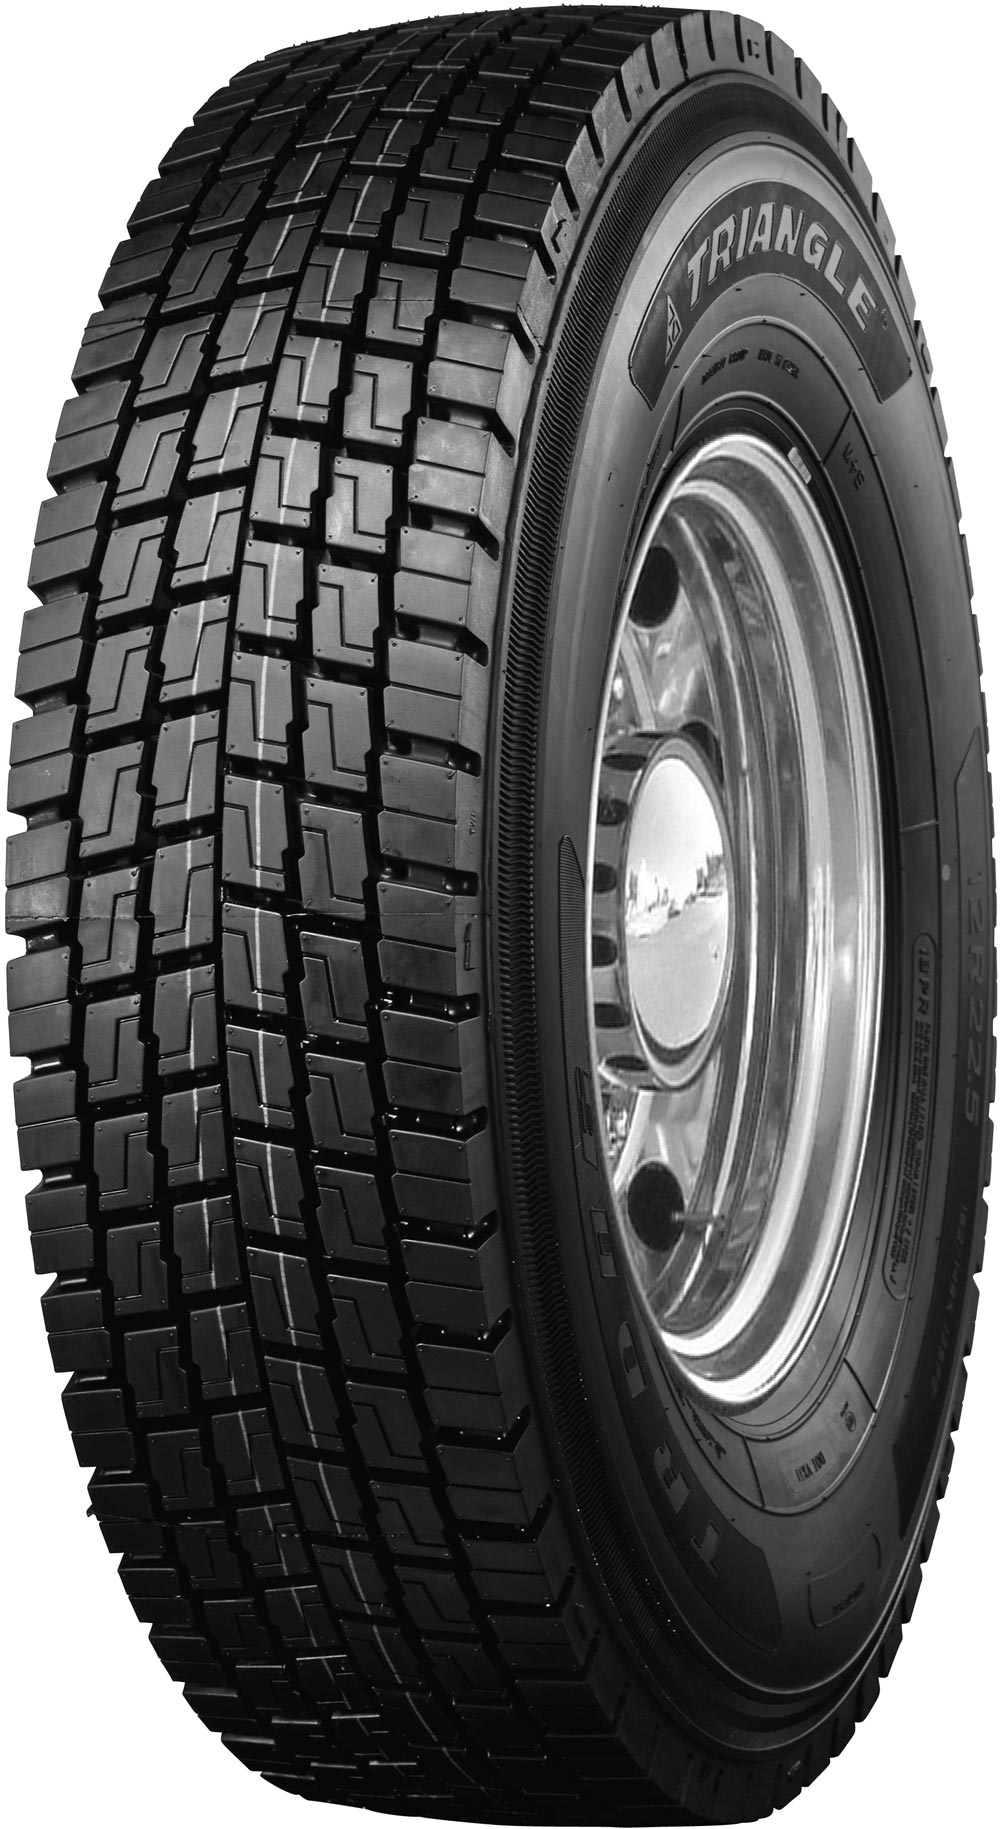 product_type-heavy_tires Triangle TRD06 14PR 9.5 R17.5 129L